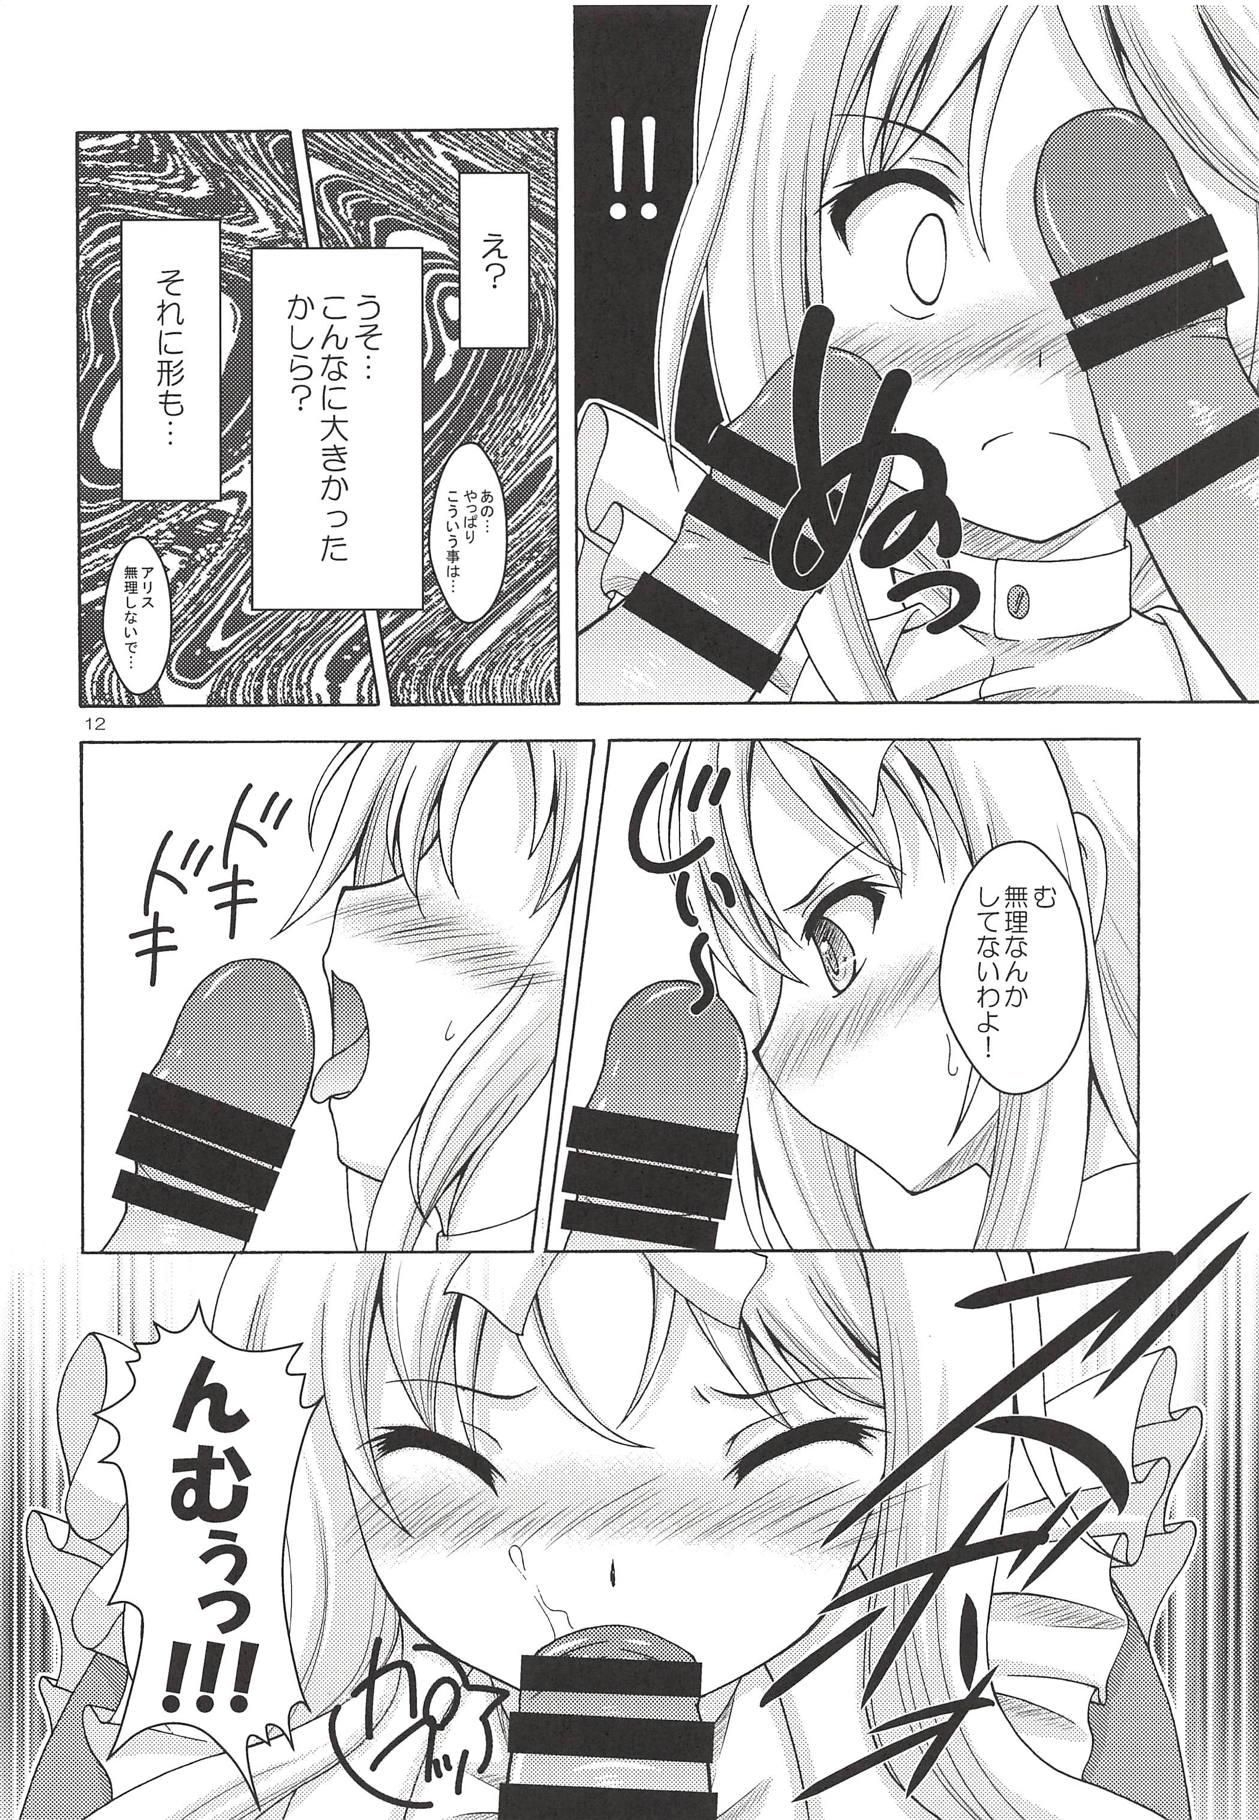 Hot Women Having Sex Alice no Yume - Sword art online Squirting - Page 11